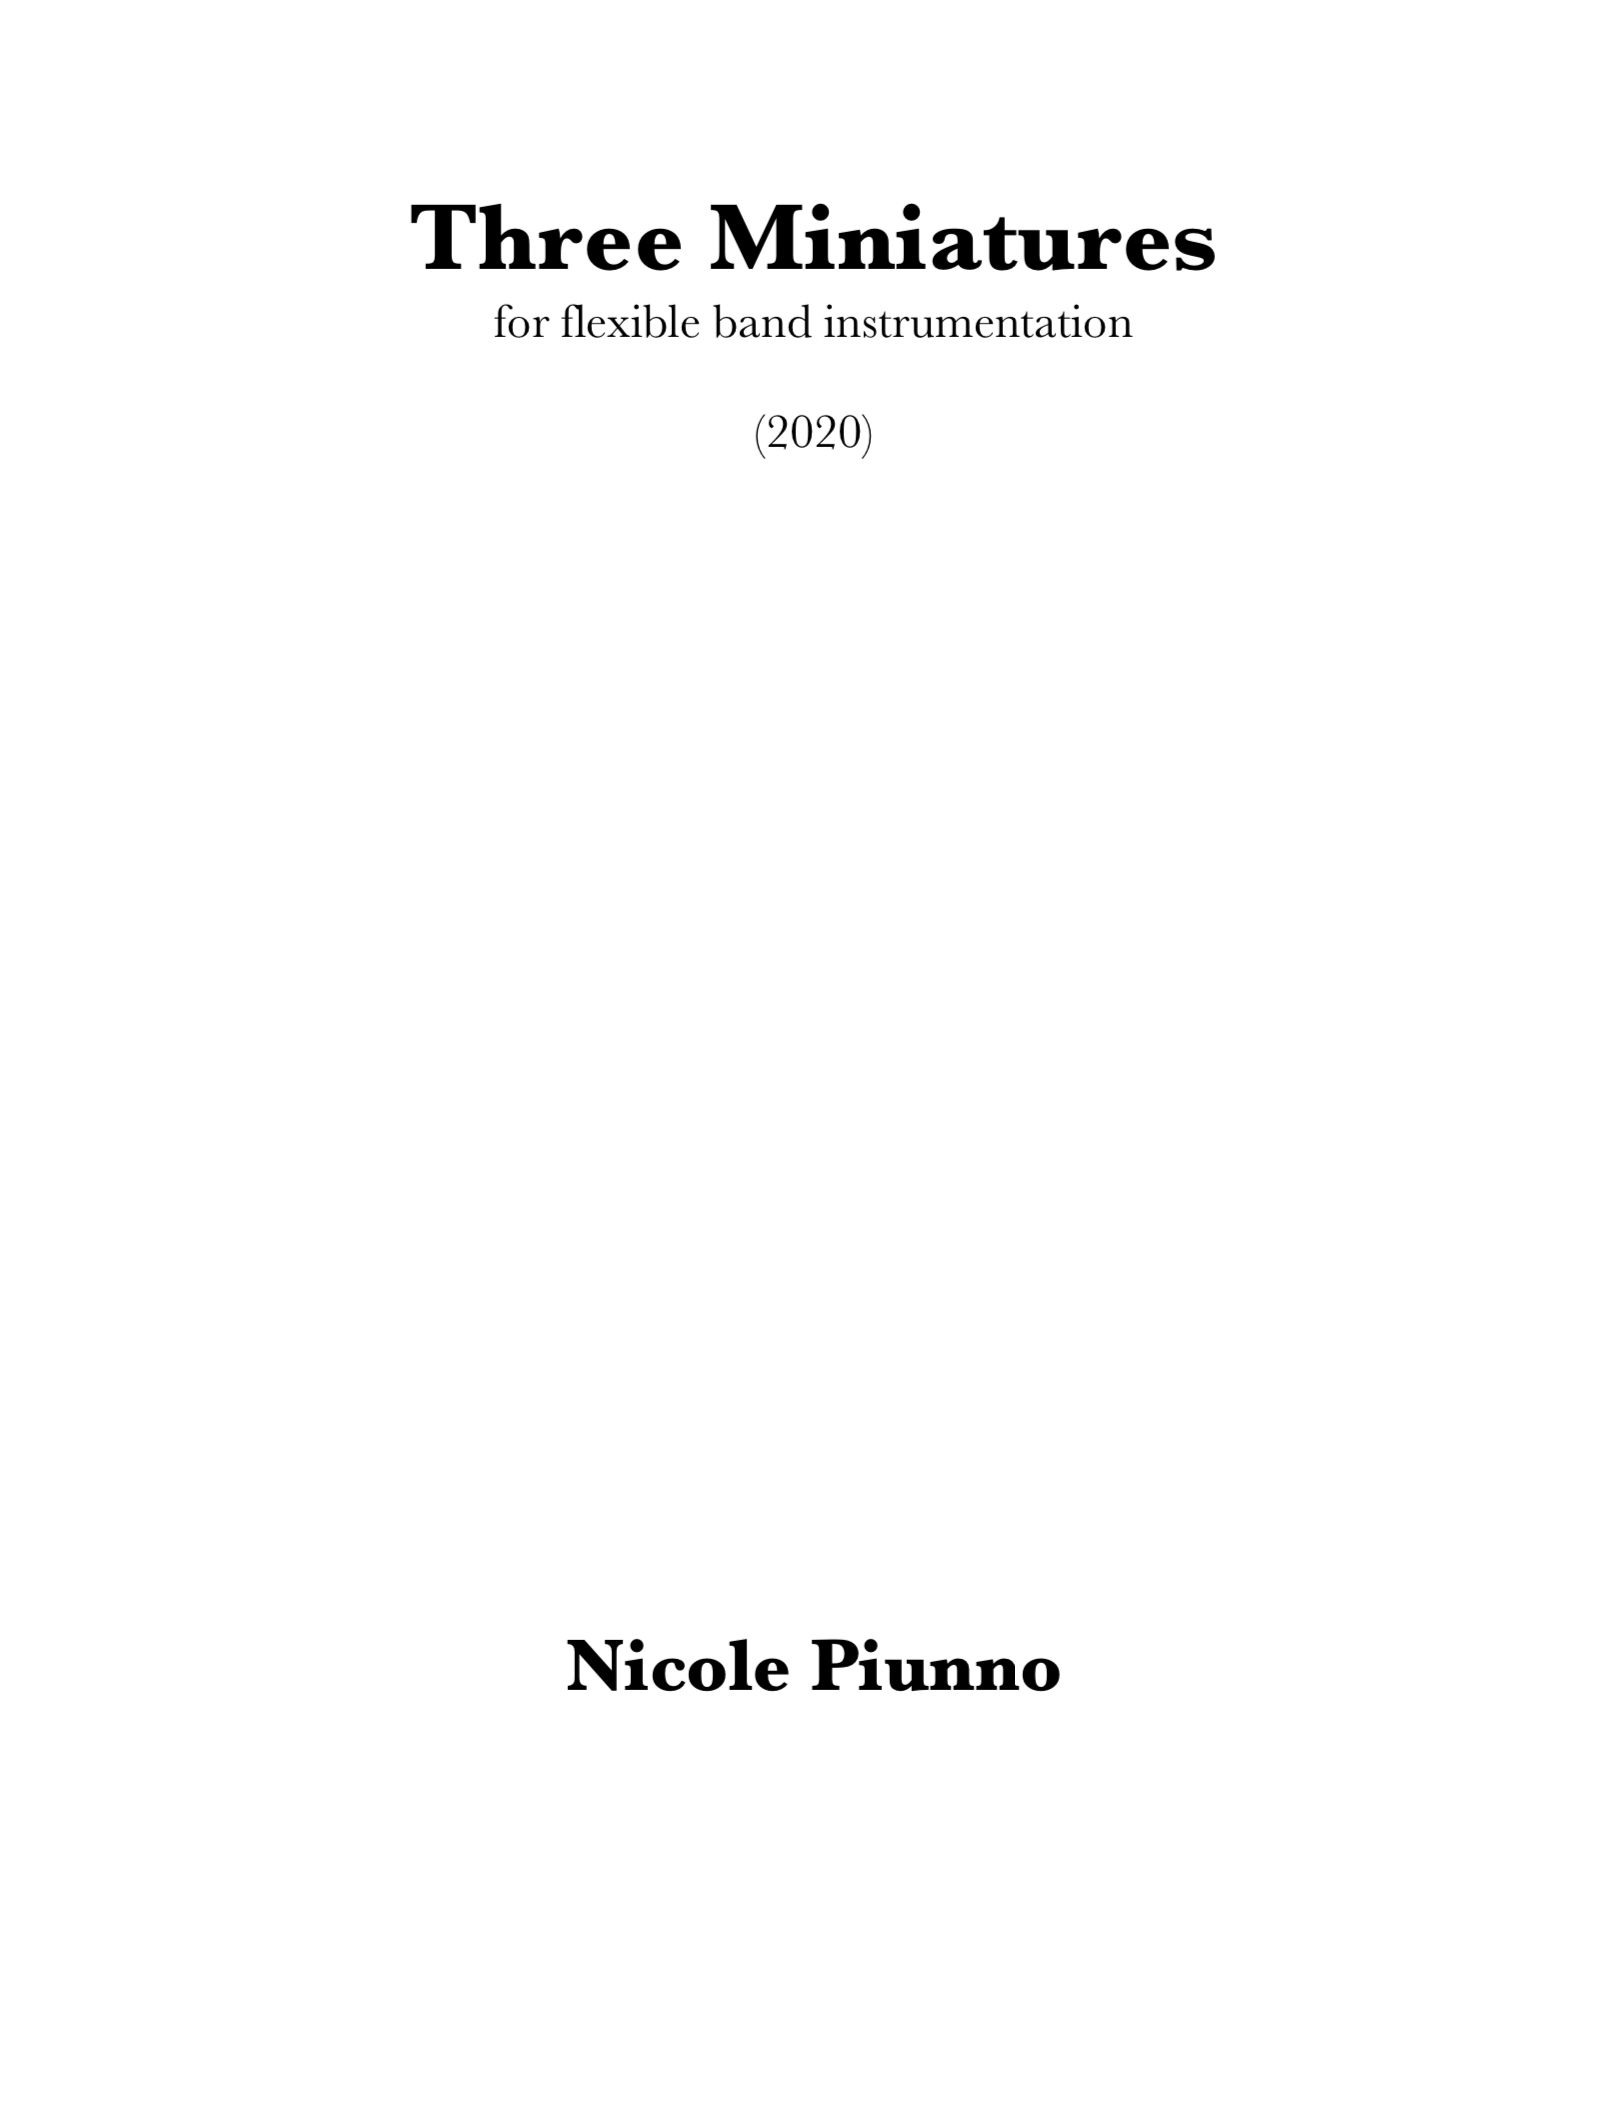 Three Miniatures (Score Only) by Nicole Piunno